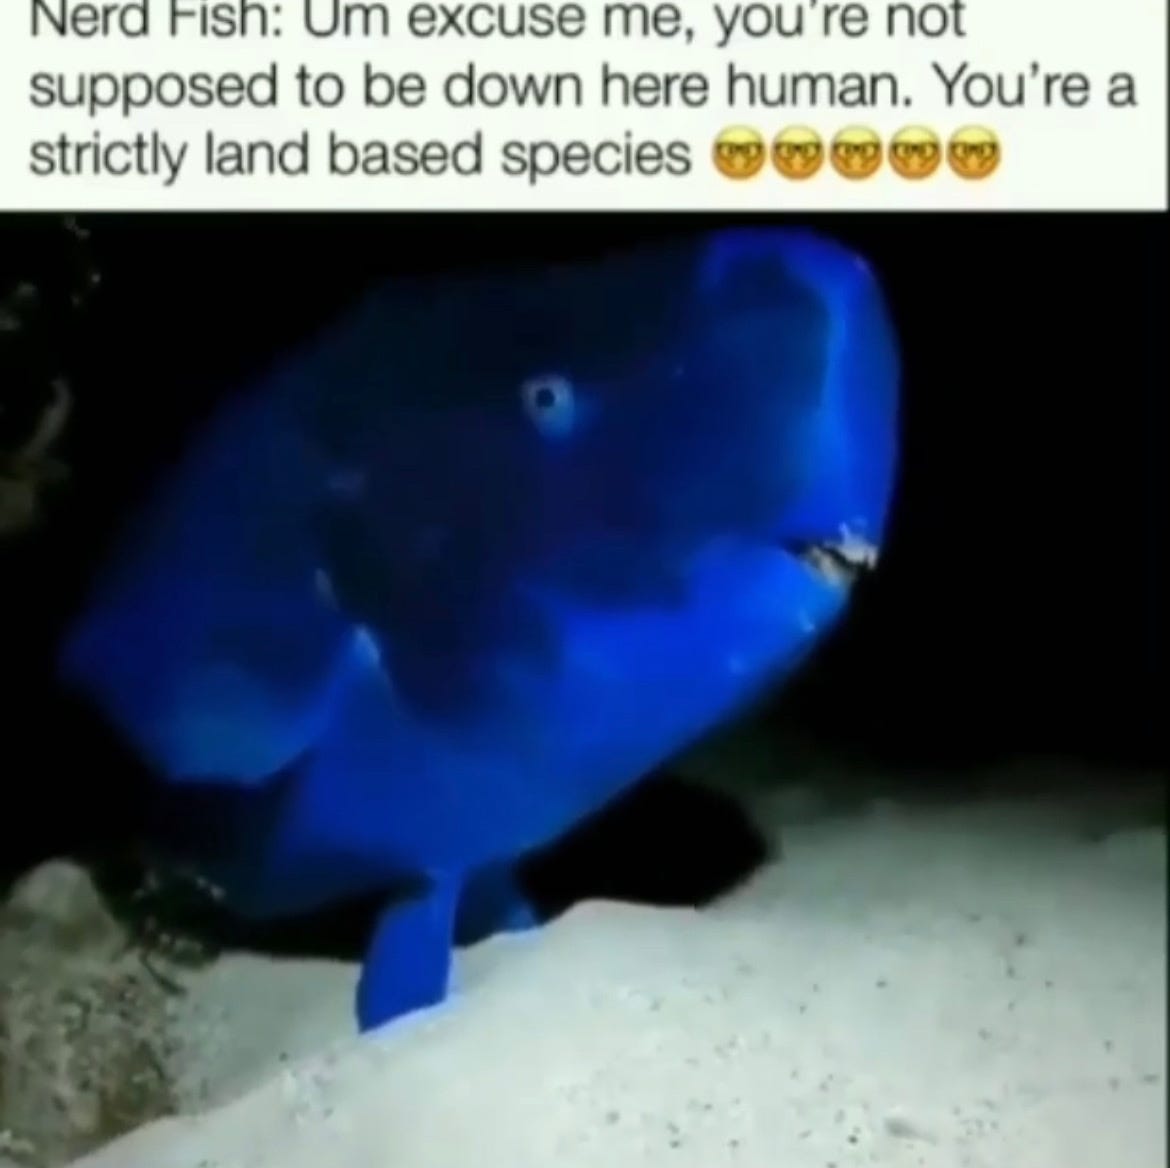 Image of a bright blue fish with what appears to be an overbite with the caption, "Nerd Fish: Um excuse me, you're not supposed to be down here human. You're a strictly land based species" followed by four "nerd with glasses" emoji